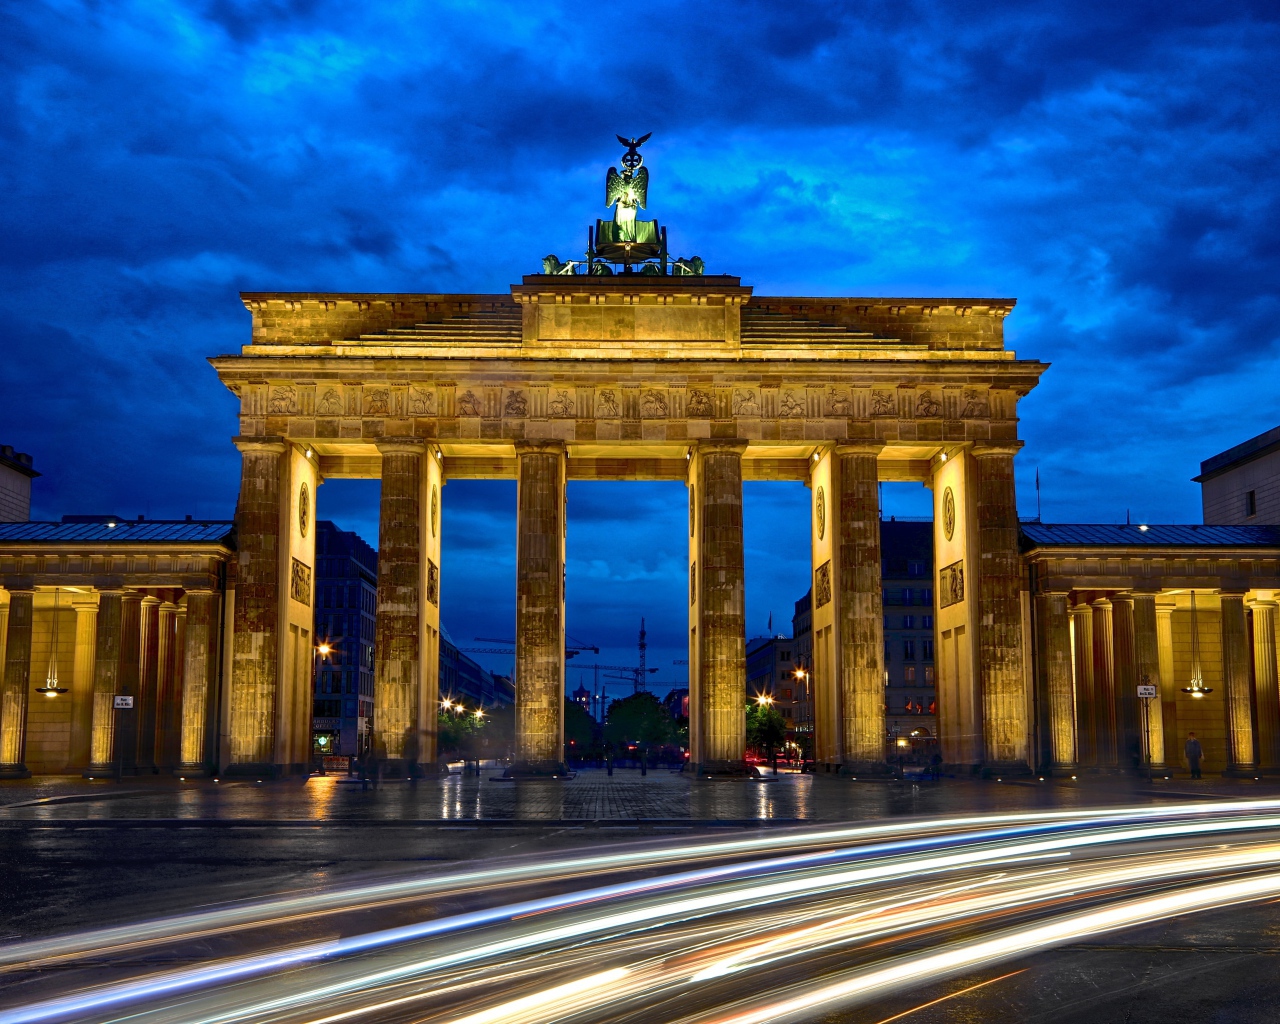 Architectural monument of the Brandenburg Gate, Berlin. Germany